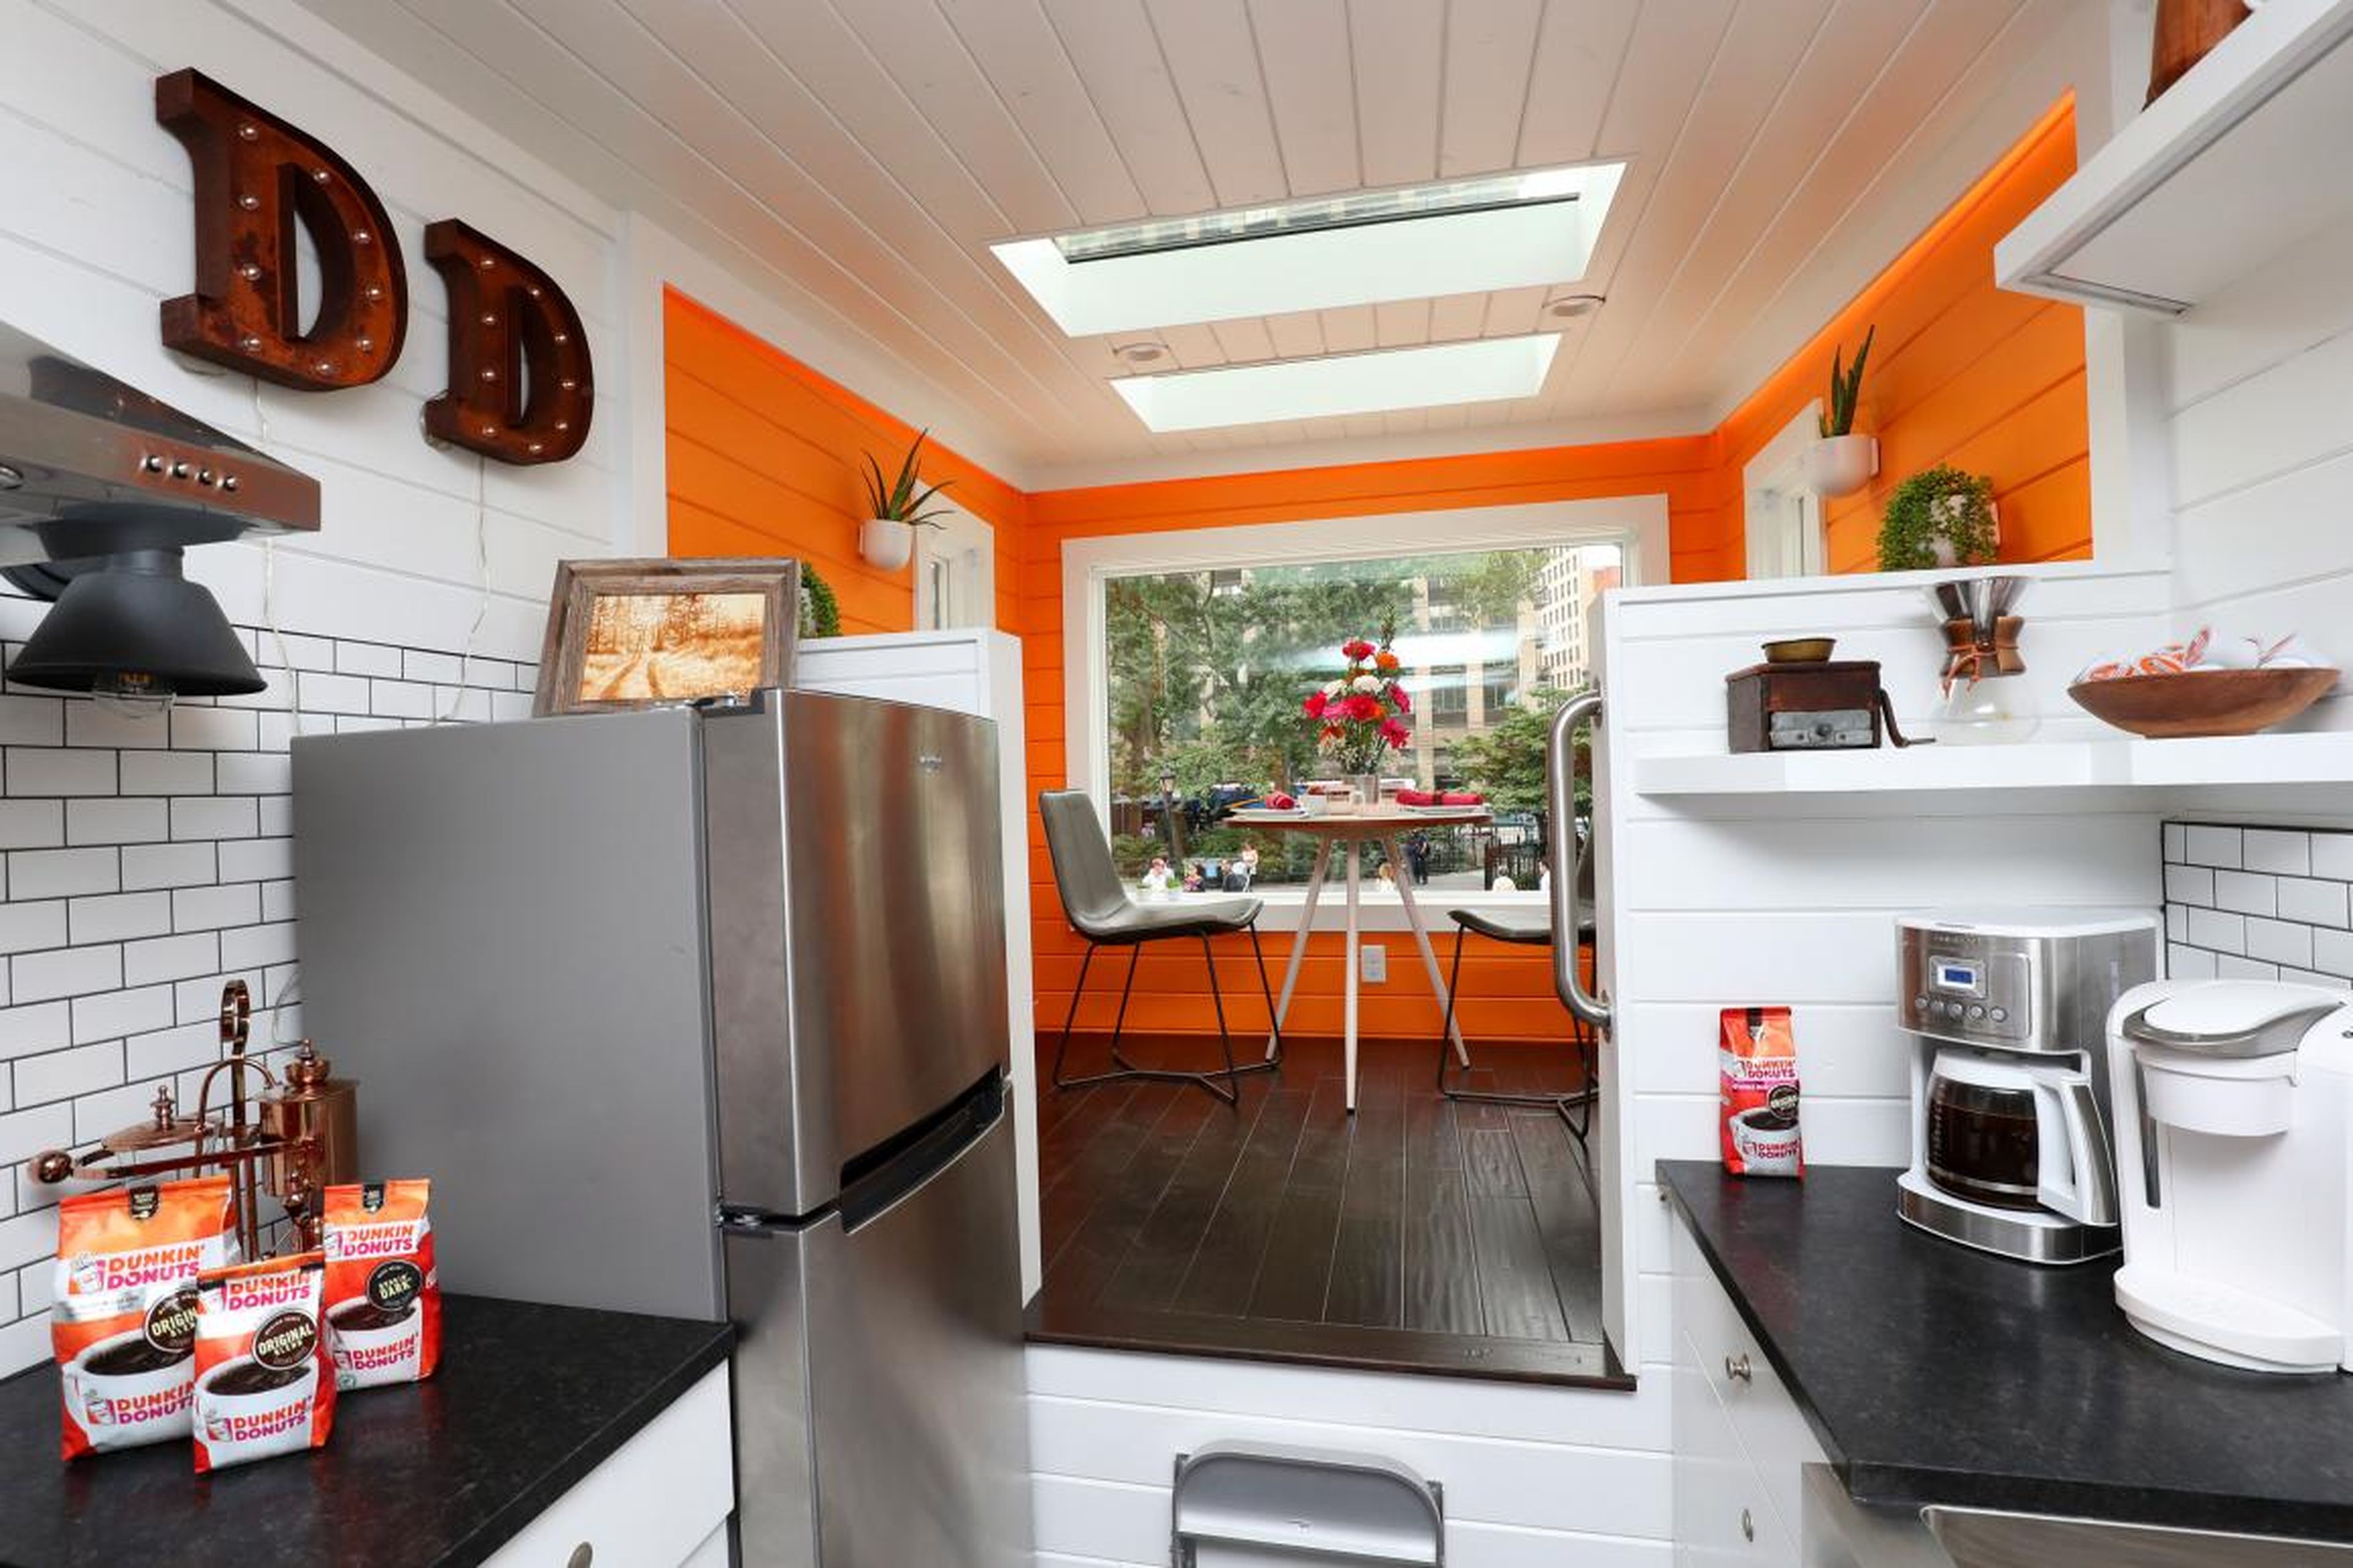 The 275-square-foot structure — which includes a full kitchen — was formerly available for rent for just $10 a night.